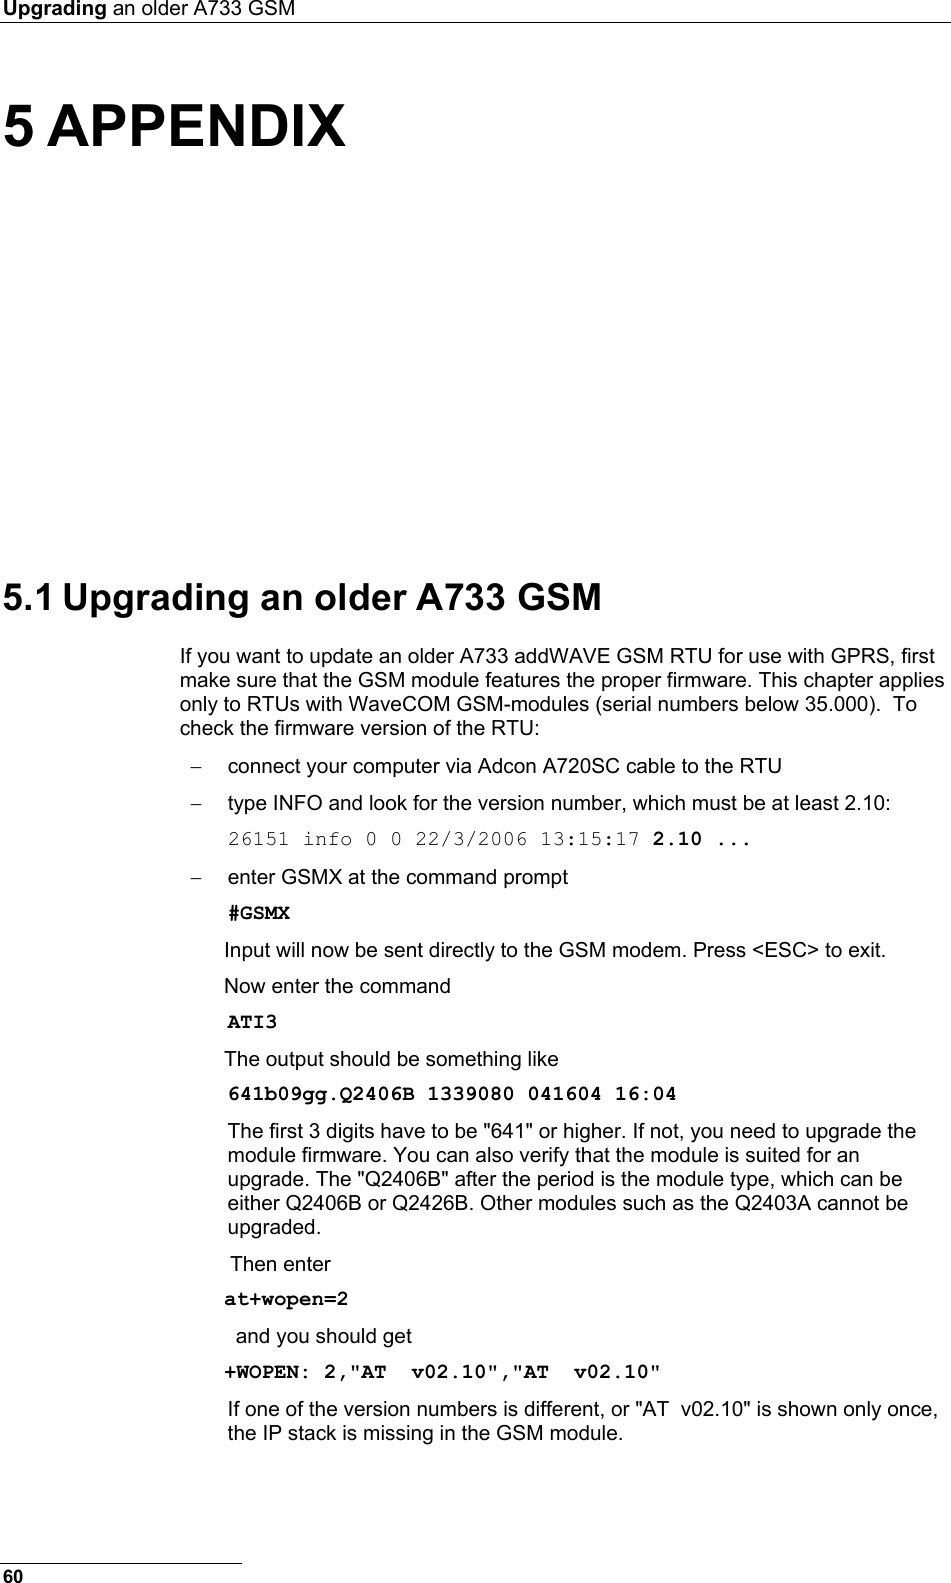 Upgrading an older A733 GSM  5 APPENDIX 5.1 Upgrading an older A733 GSM If you want to update an older A733 addWAVE GSM RTU for use with GPRS, first make sure that the GSM module features the proper firmware. This chapter applies only to RTUs with WaveCOM GSM-modules (serial numbers below 35.000).  To check the firmware version of the RTU:  −  connect your computer via Adcon A720SC cable to the RTU −  type INFO and look for the version number, which must be at least 2.10: 26151 info 0 0 22/3/2006 13:15:17 2.10 ... −  enter GSMX at the command prompt #GSMX Input will now be sent directly to the GSM modem. Press &lt;ESC&gt; to exit. Now enter the command ATI3 The output should be something like 641b09gg.Q2406B 1339080 041604 16:04 The first 3 digits have to be &quot;641&quot; or higher. If not, you need to upgrade the module firmware. You can also verify that the module is suited for an upgrade. The &quot;Q2406B&quot; after the period is the module type, which can be either Q2406B or Q2426B. Other modules such as the Q2403A cannot be upgraded.    Then enter  at+wopen=2     and you should get   +WOPEN: 2,&quot;AT  v02.10&quot;,&quot;AT  v02.10&quot;  If one of the version numbers is different, or &quot;AT  v02.10&quot; is shown only once, the IP stack is missing in the GSM module. 60 